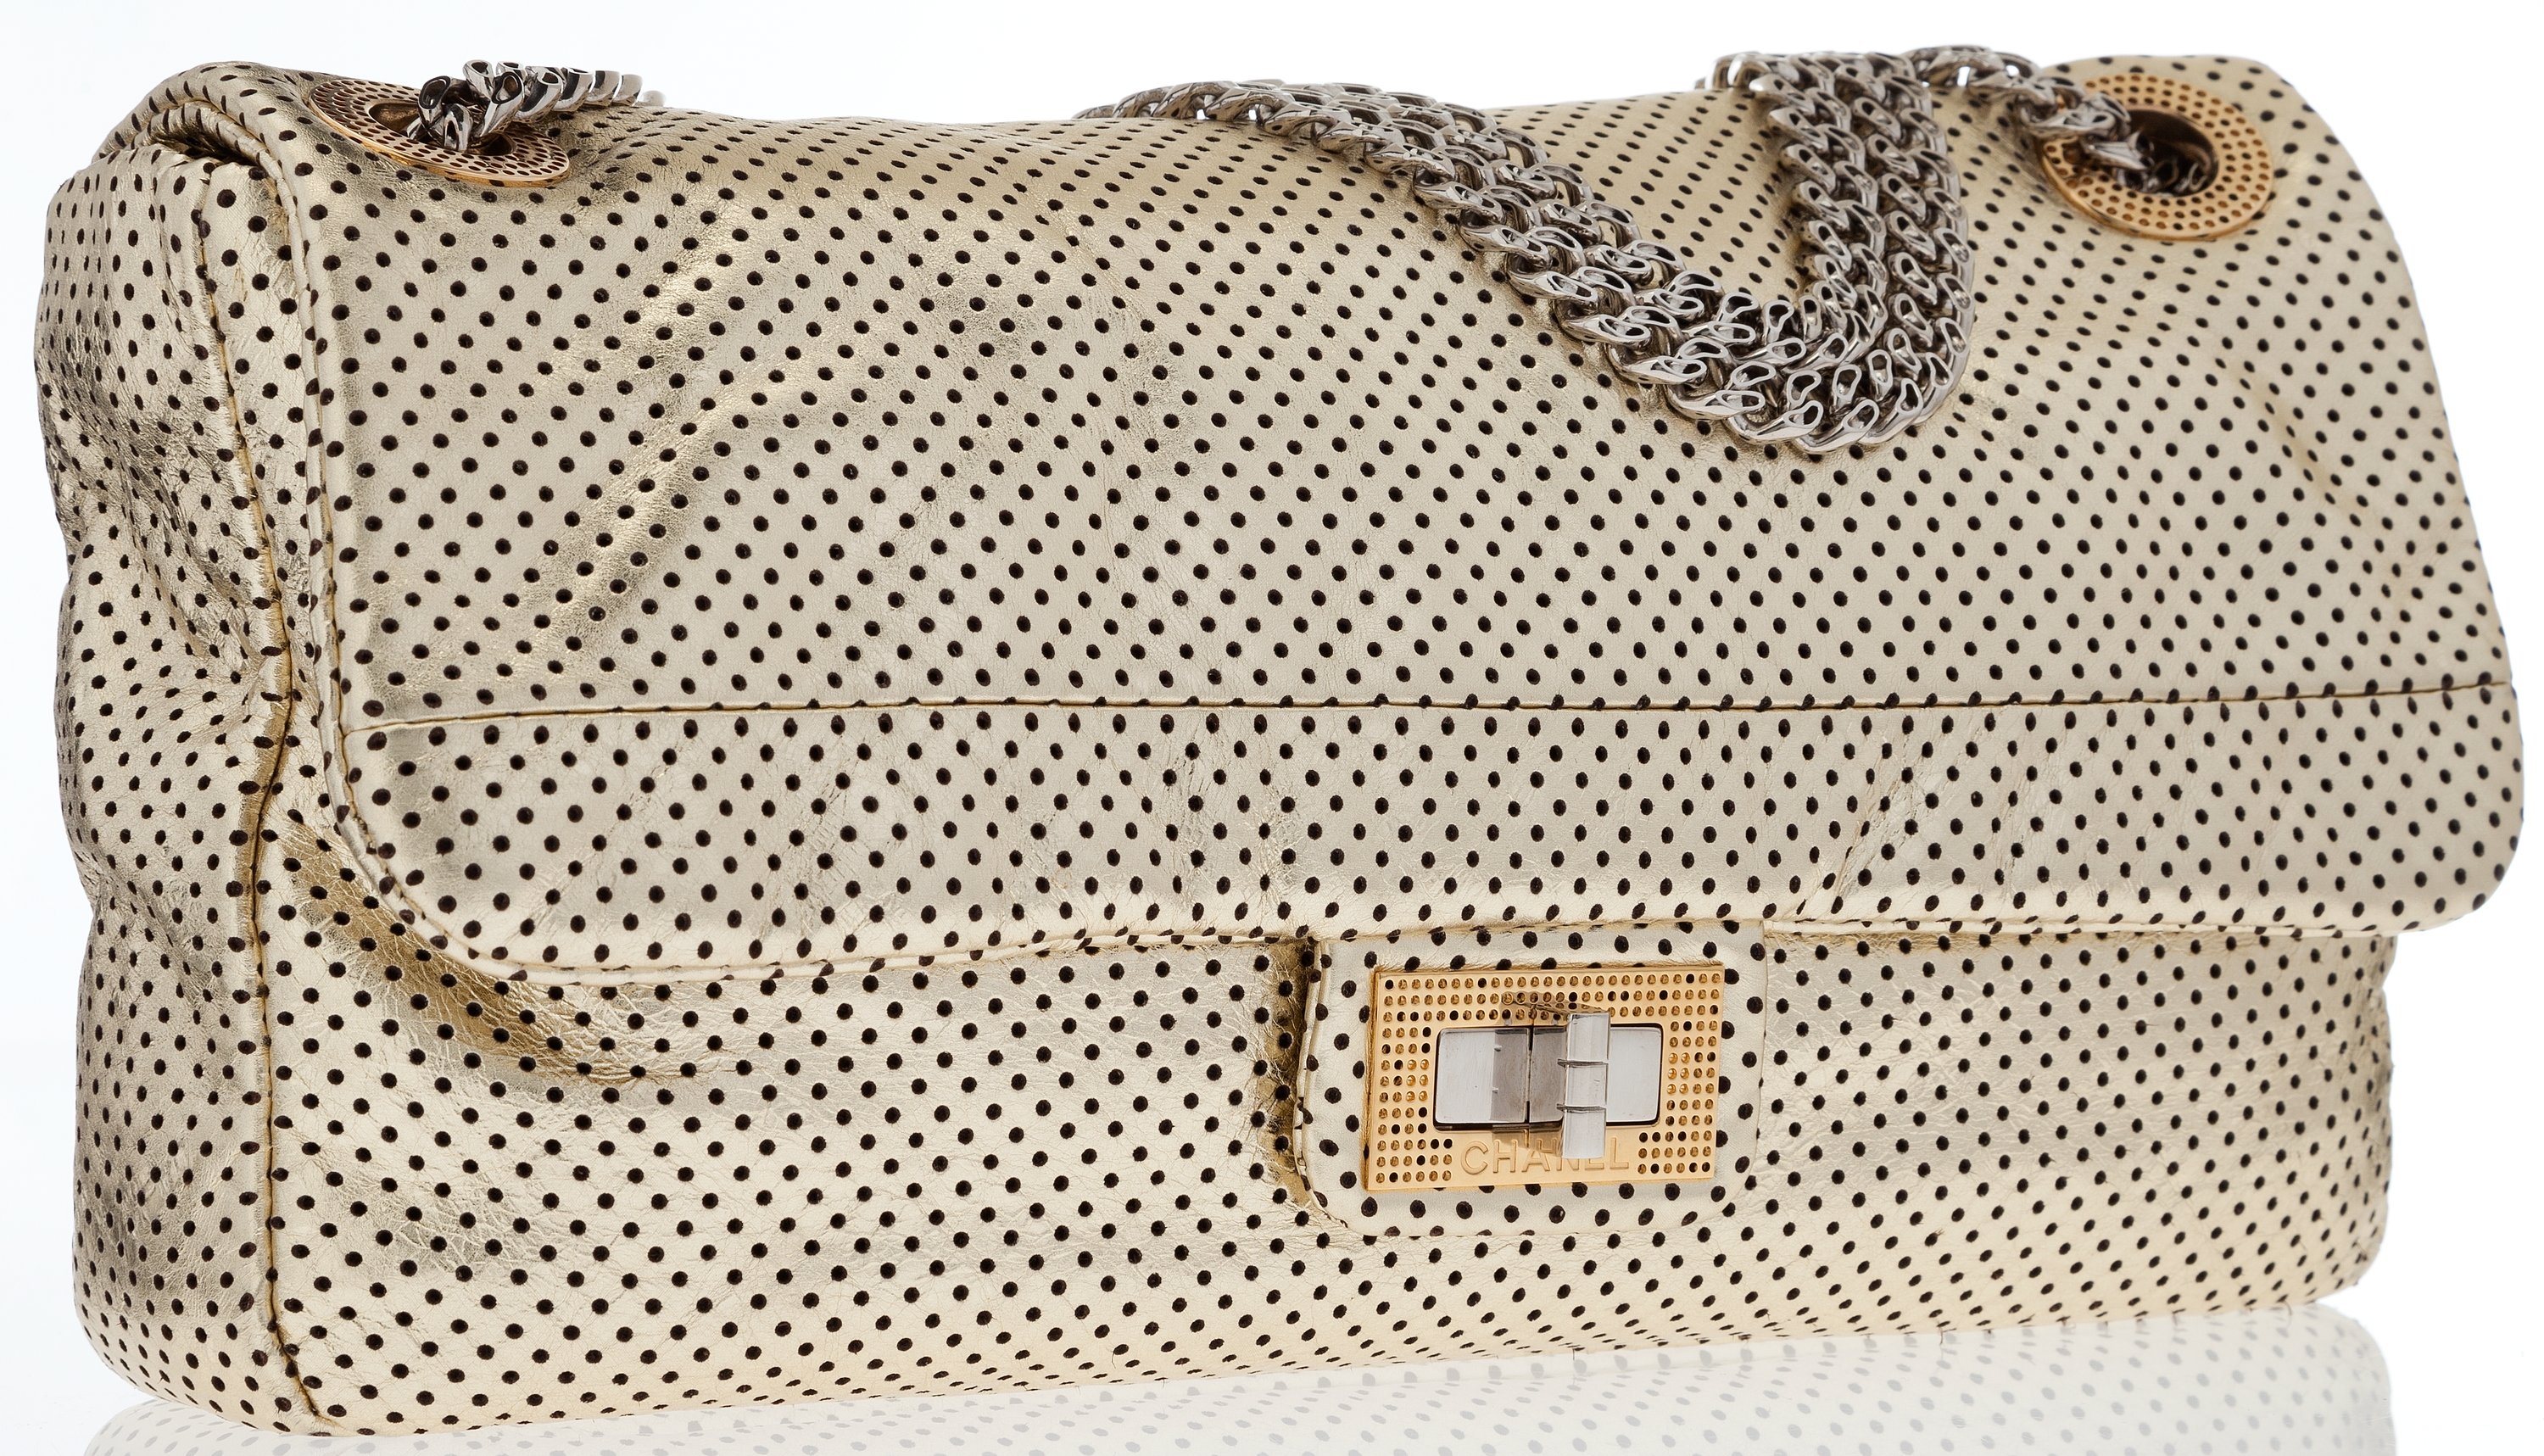 Chanel Gold Perforated Lambskin Leather Flap Bag with Silver